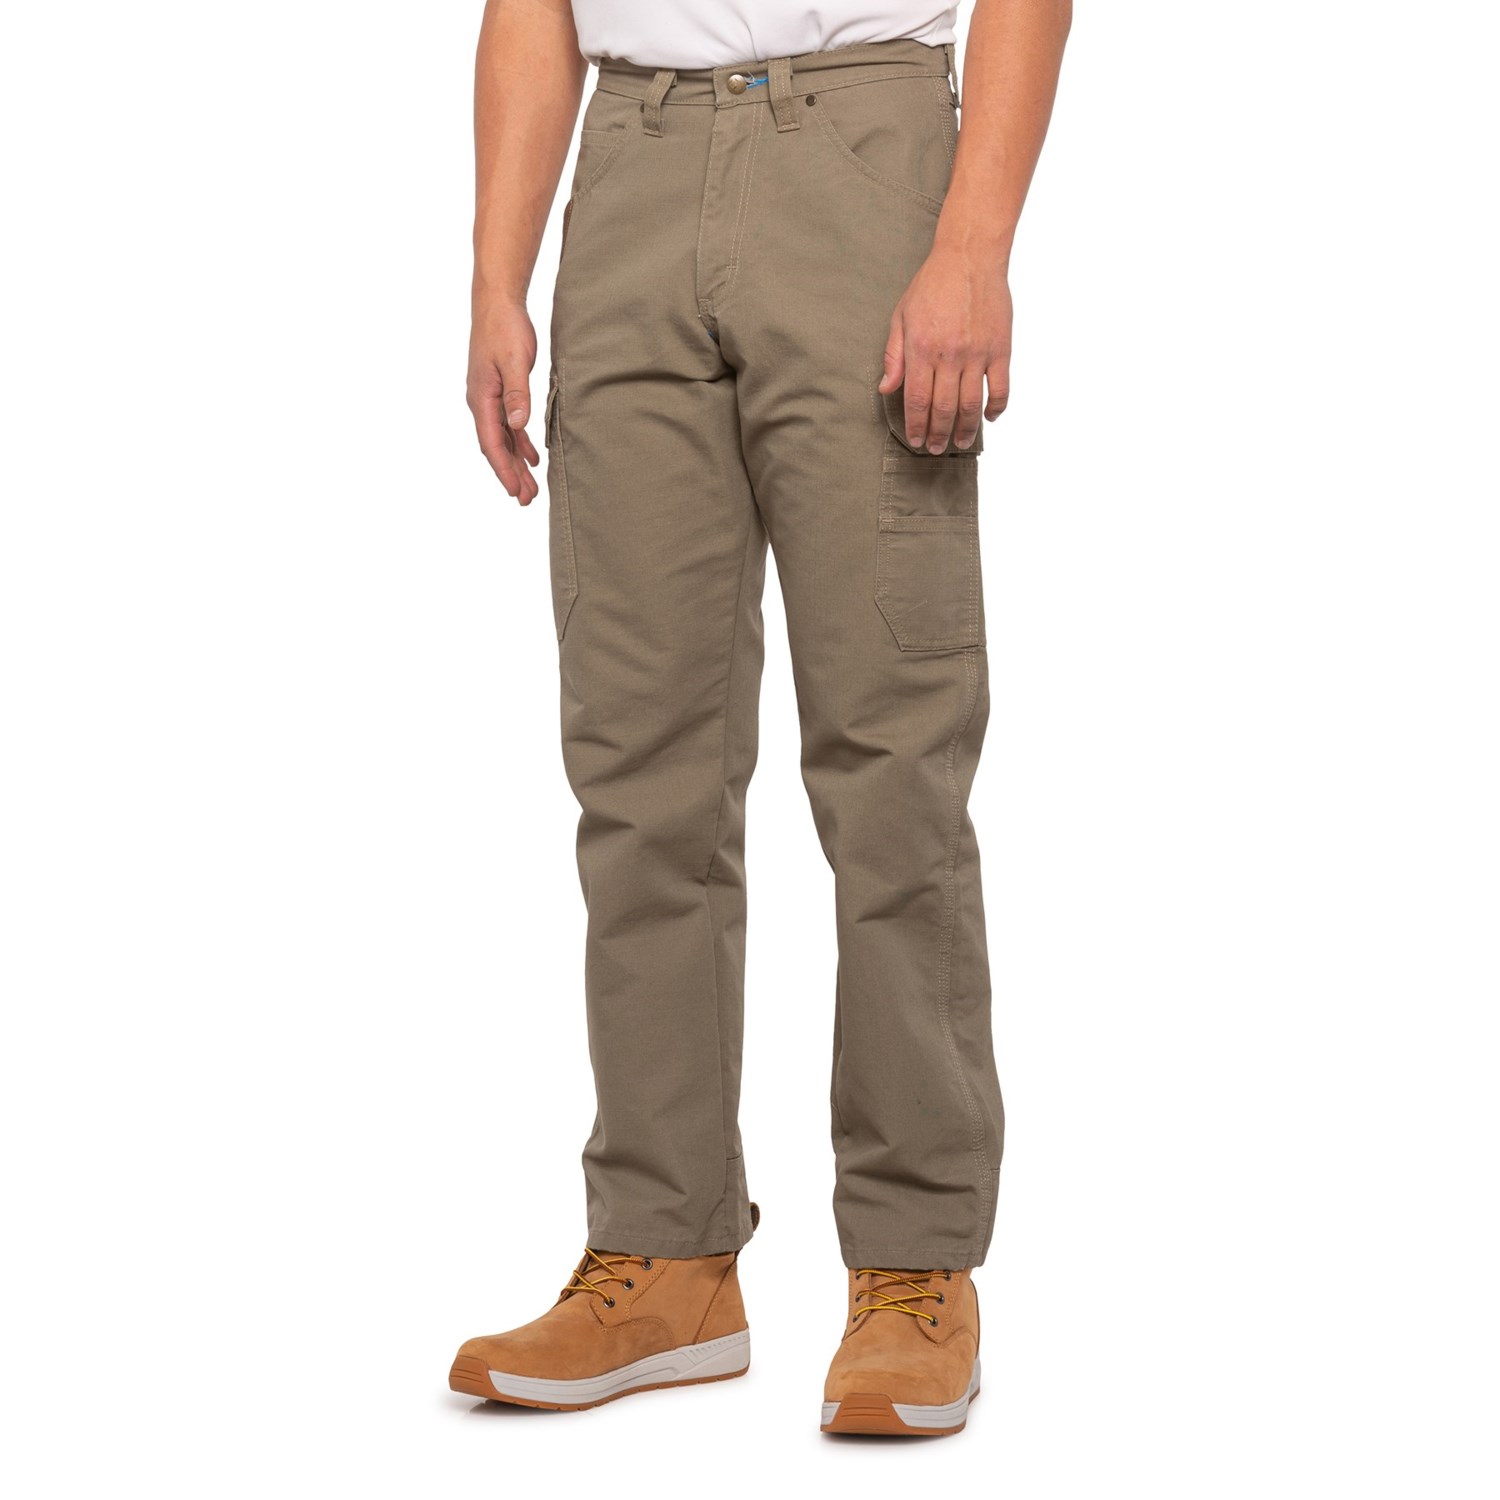 Riggs Cool Vantage Cargo Work Pants (For Men) - Save 59%